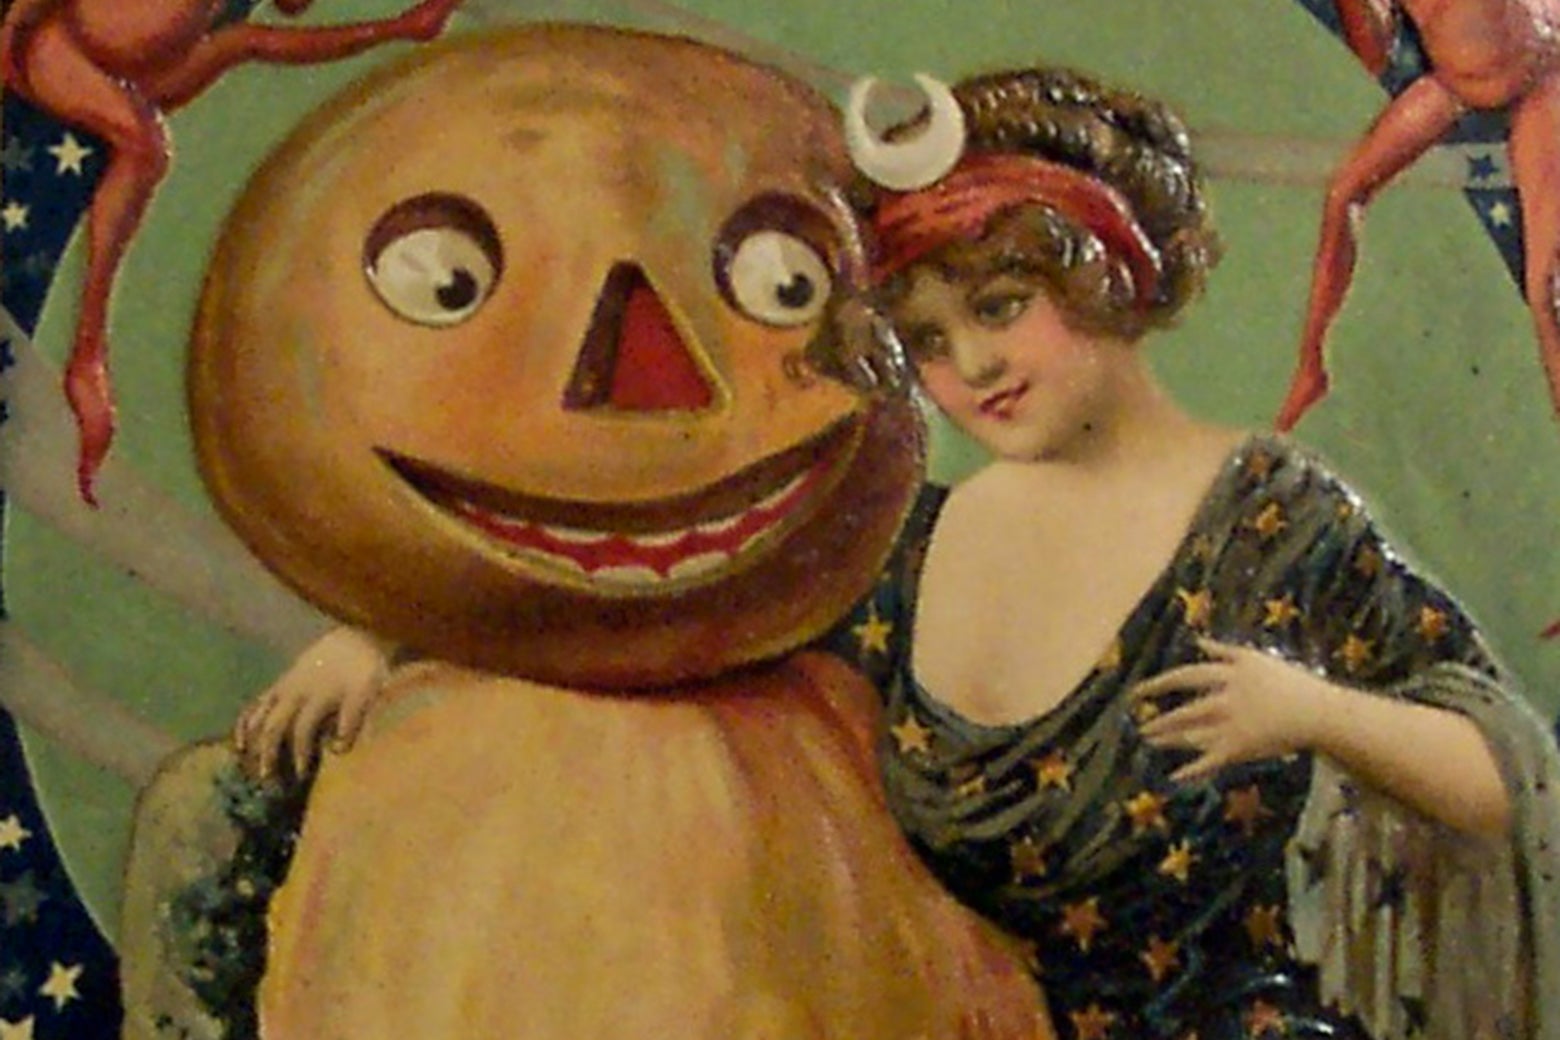 A horrible looking pumpkin headed man embraces a young woman in a Halloween card from 1912.